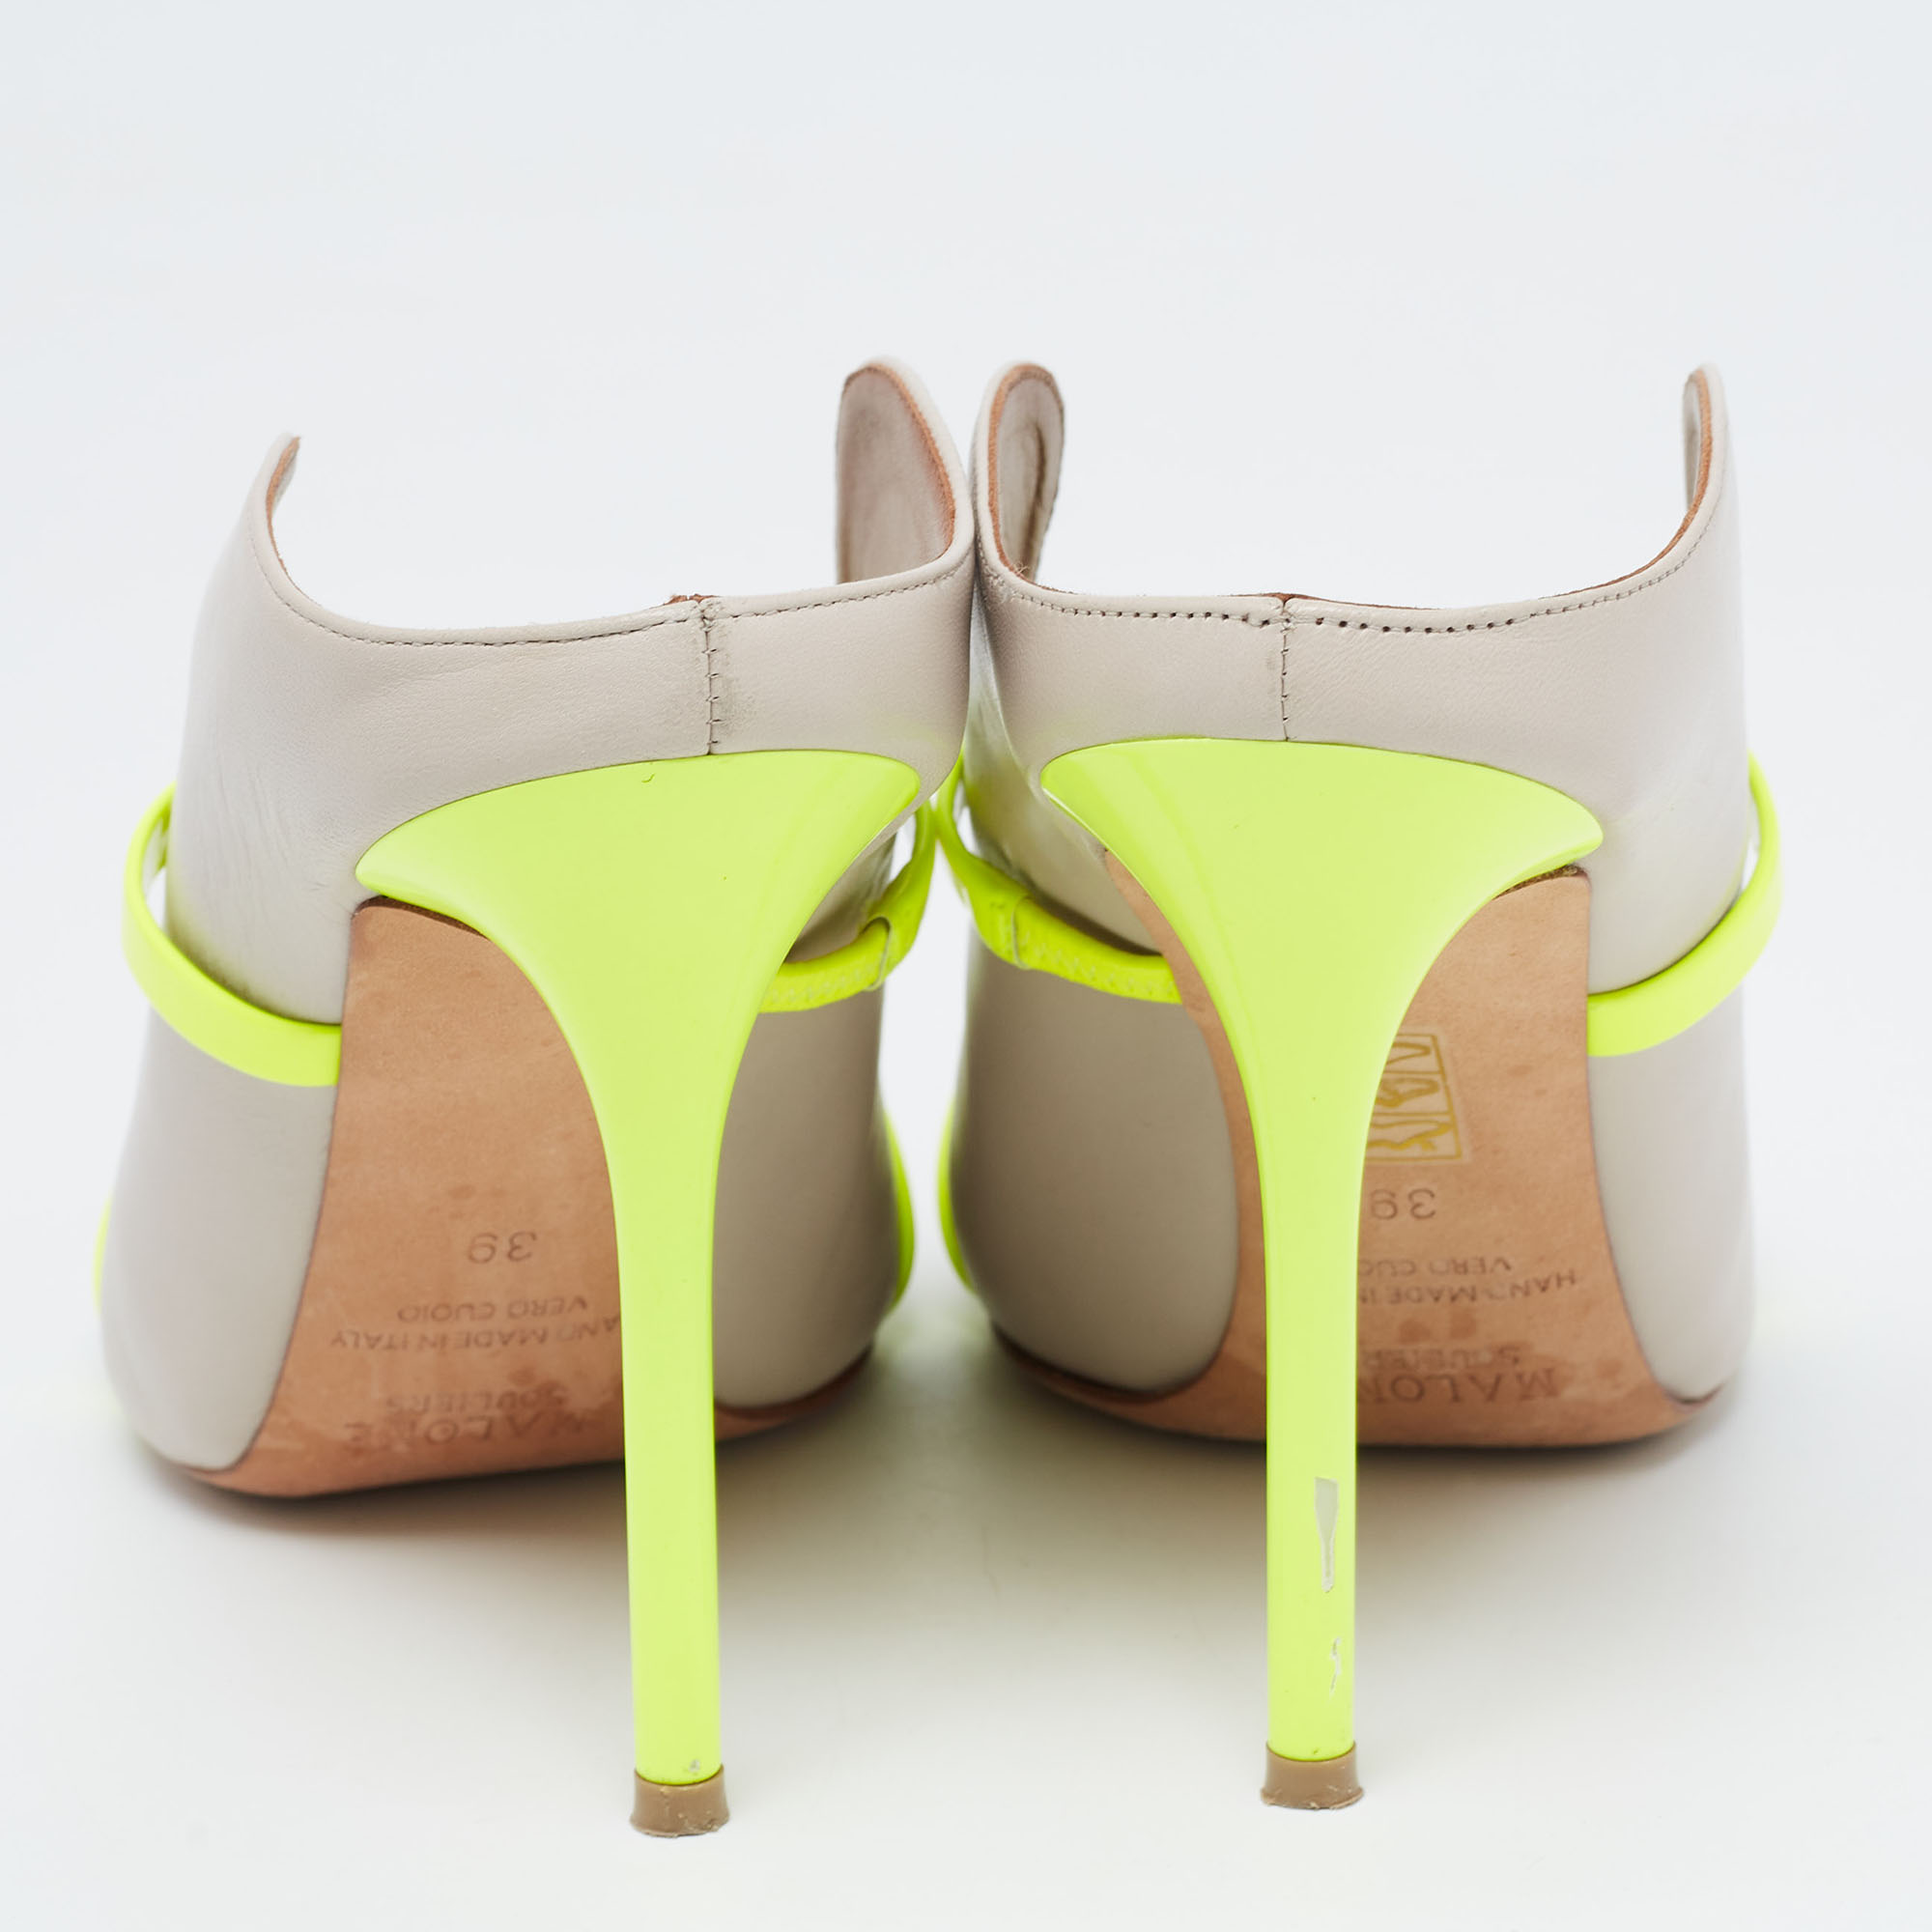 Malone Souliers Grey/Neon Green Leather And Patent Maureen Mules Size 39